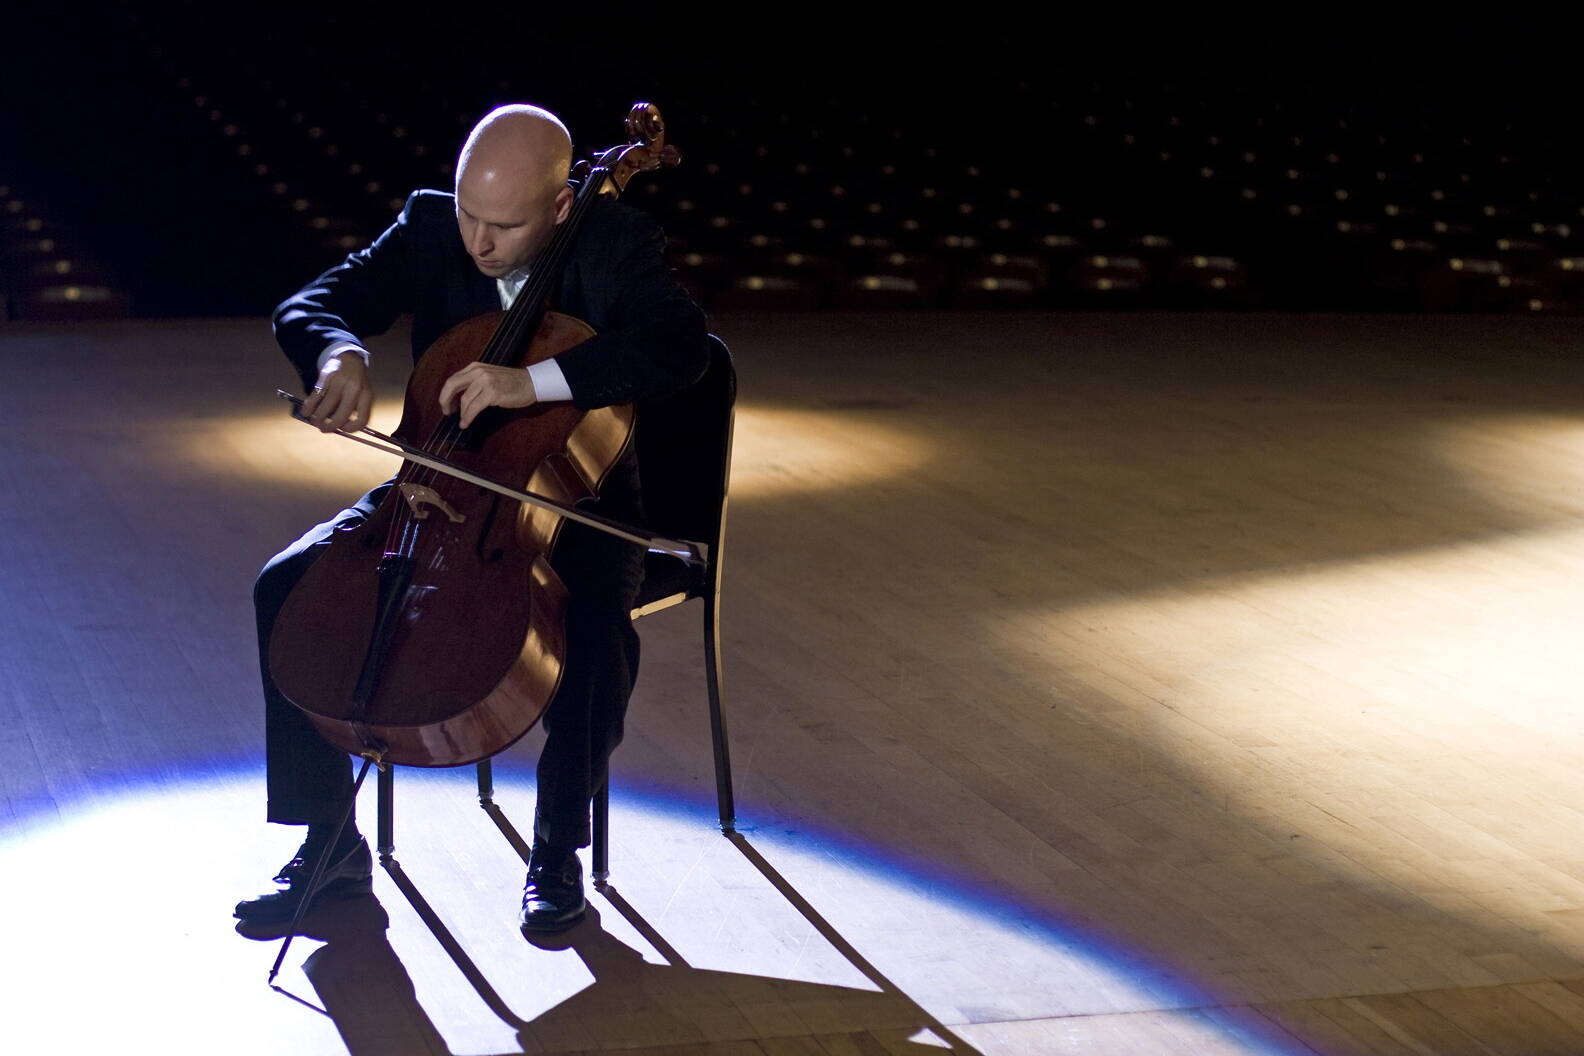 Robert DeMaine, principal cellist of the L.A. Philharmonic, is scheduled to perform Dvorak’s Cello Concerto during a pair of concerts this weekend by the Juneau Symphony. (Courtesy Photo / Daniel Lippitt)